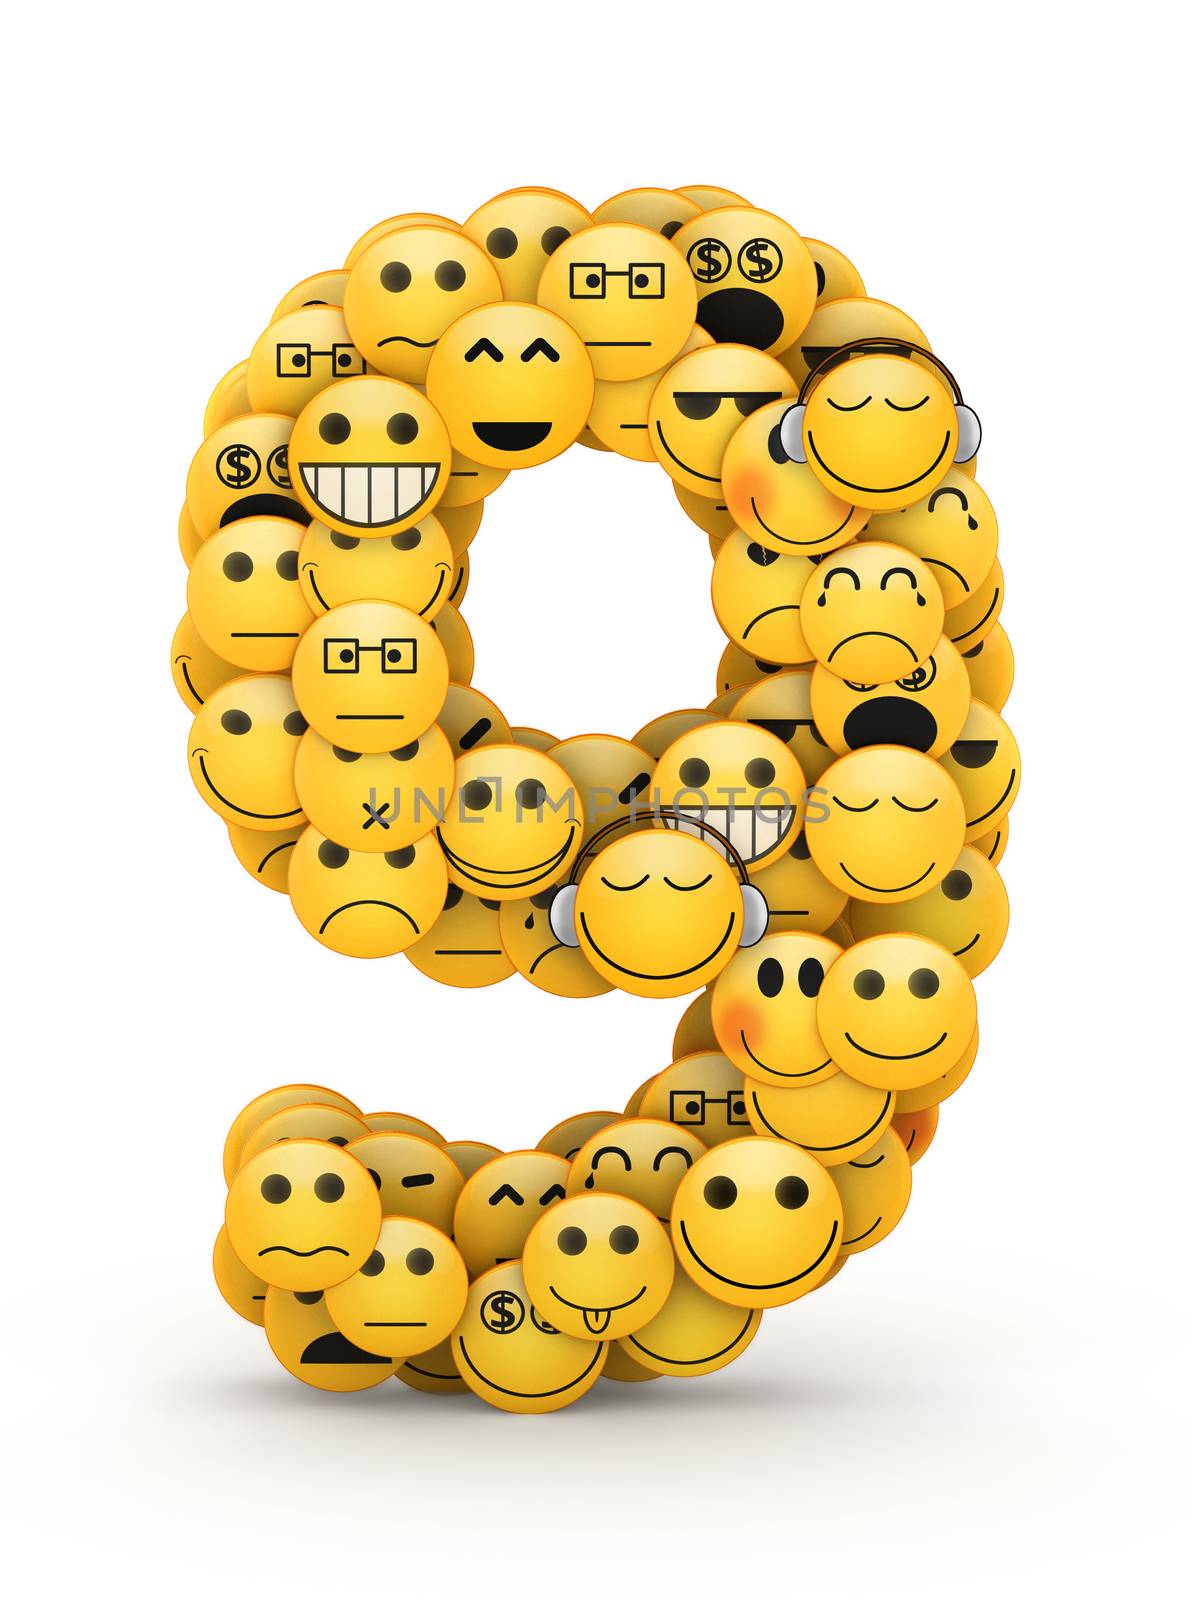 Number 9 compiled from Emoticons smiles with different emotions